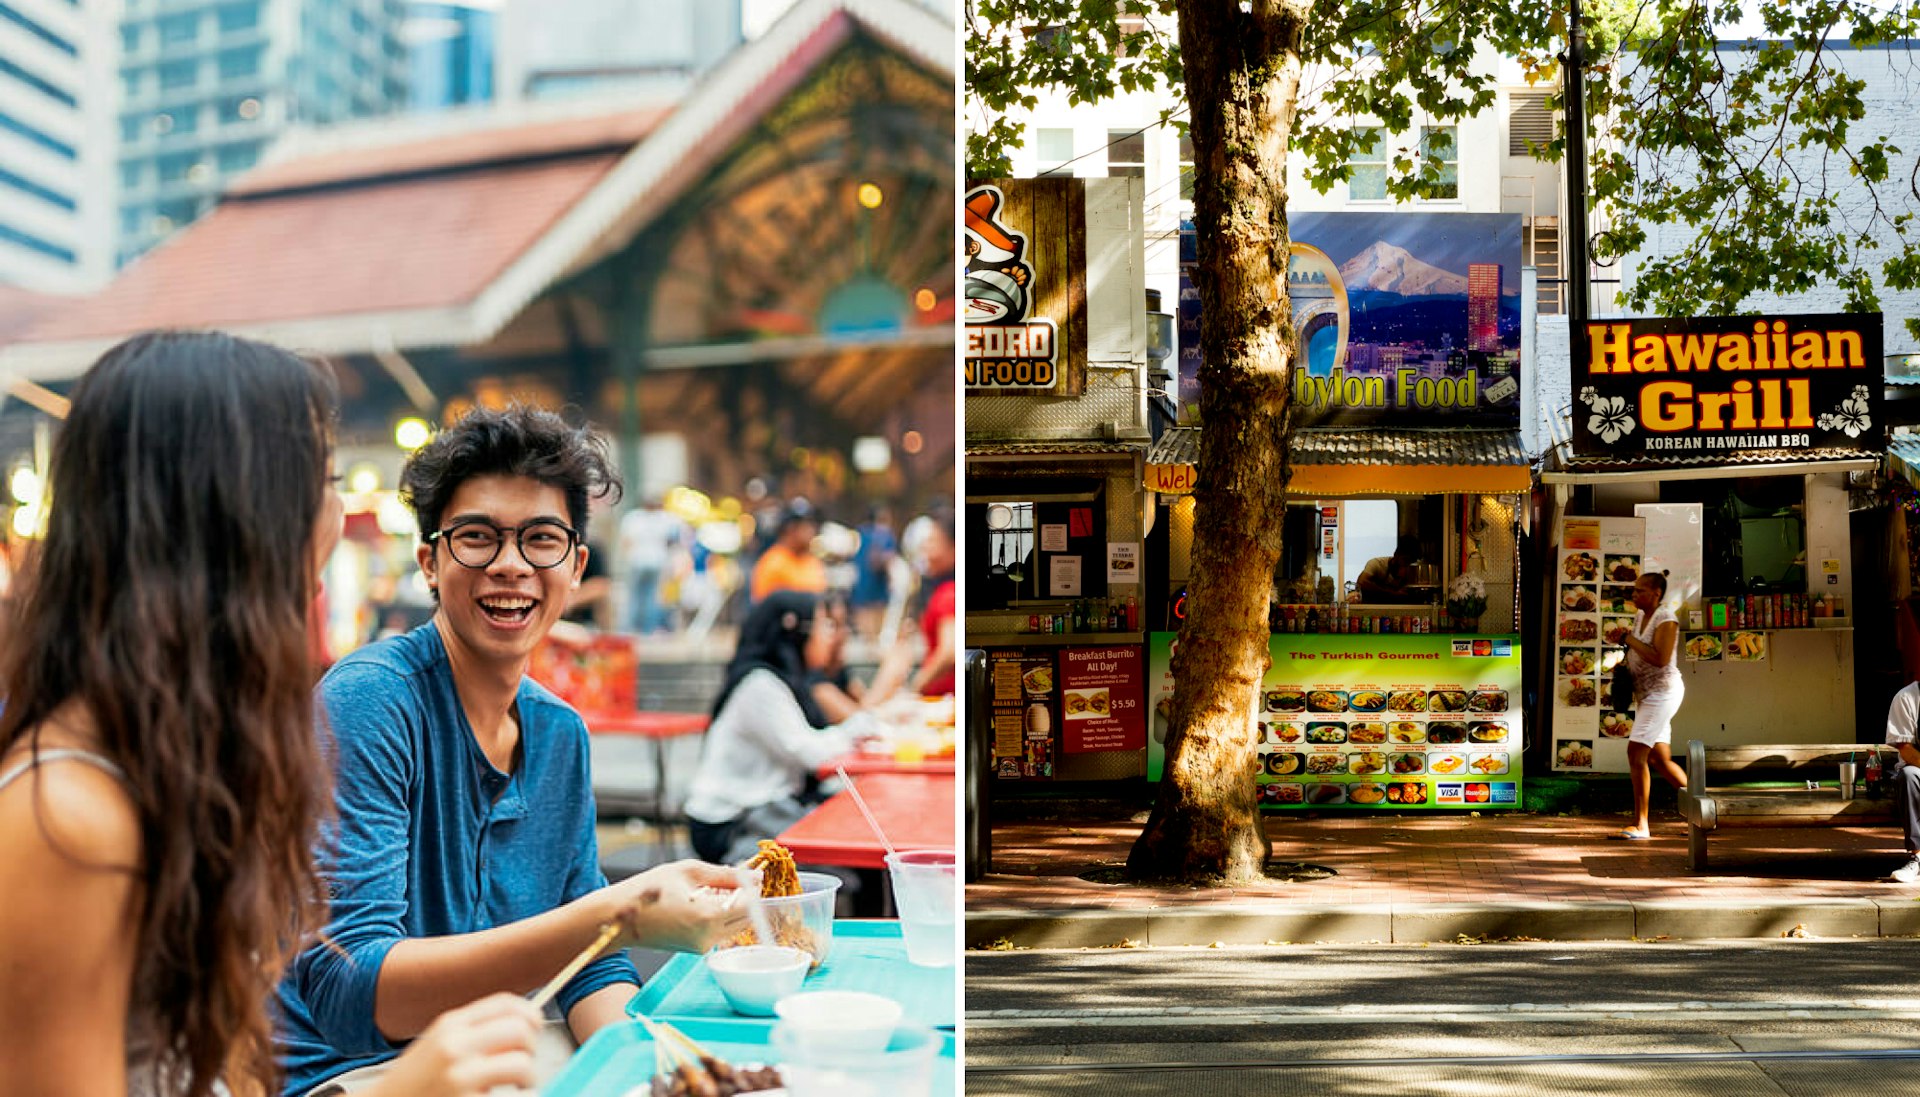 Taste the incredible hawker food of Singapore; hit up the stalls of Portland